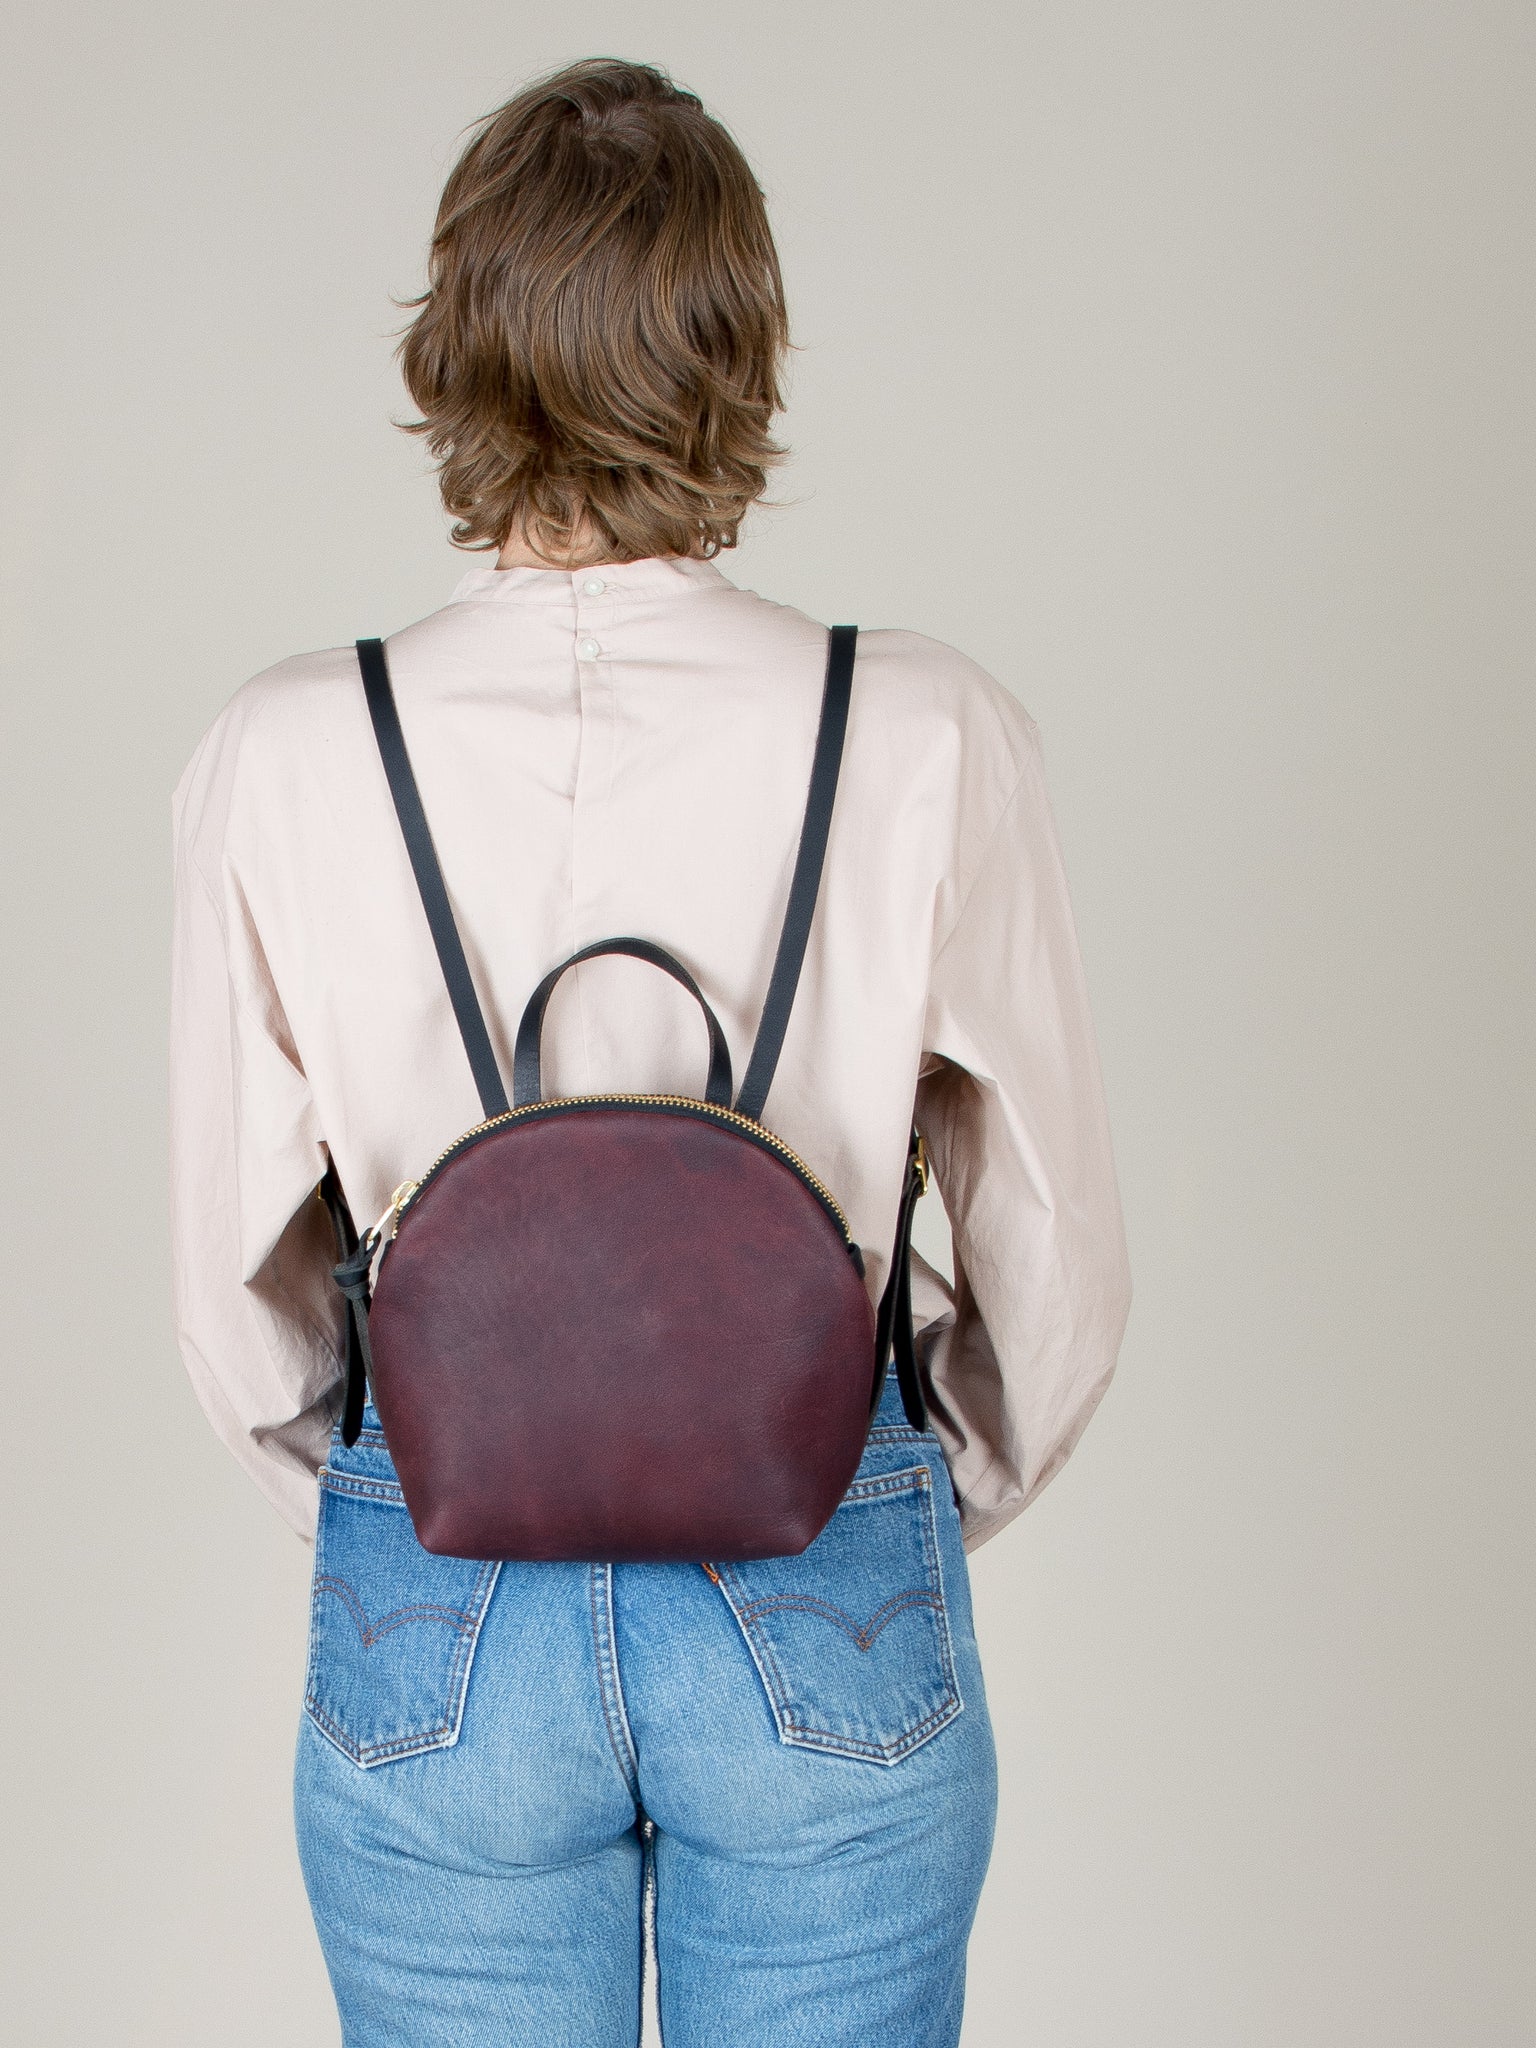 Eleven Thirty Anni Mini Backpack Leather Bag Purse Made in Canada Slow Fashion Sustainable St Joseph Island Algoma Sault Ste Marie Richards Landing Shopping